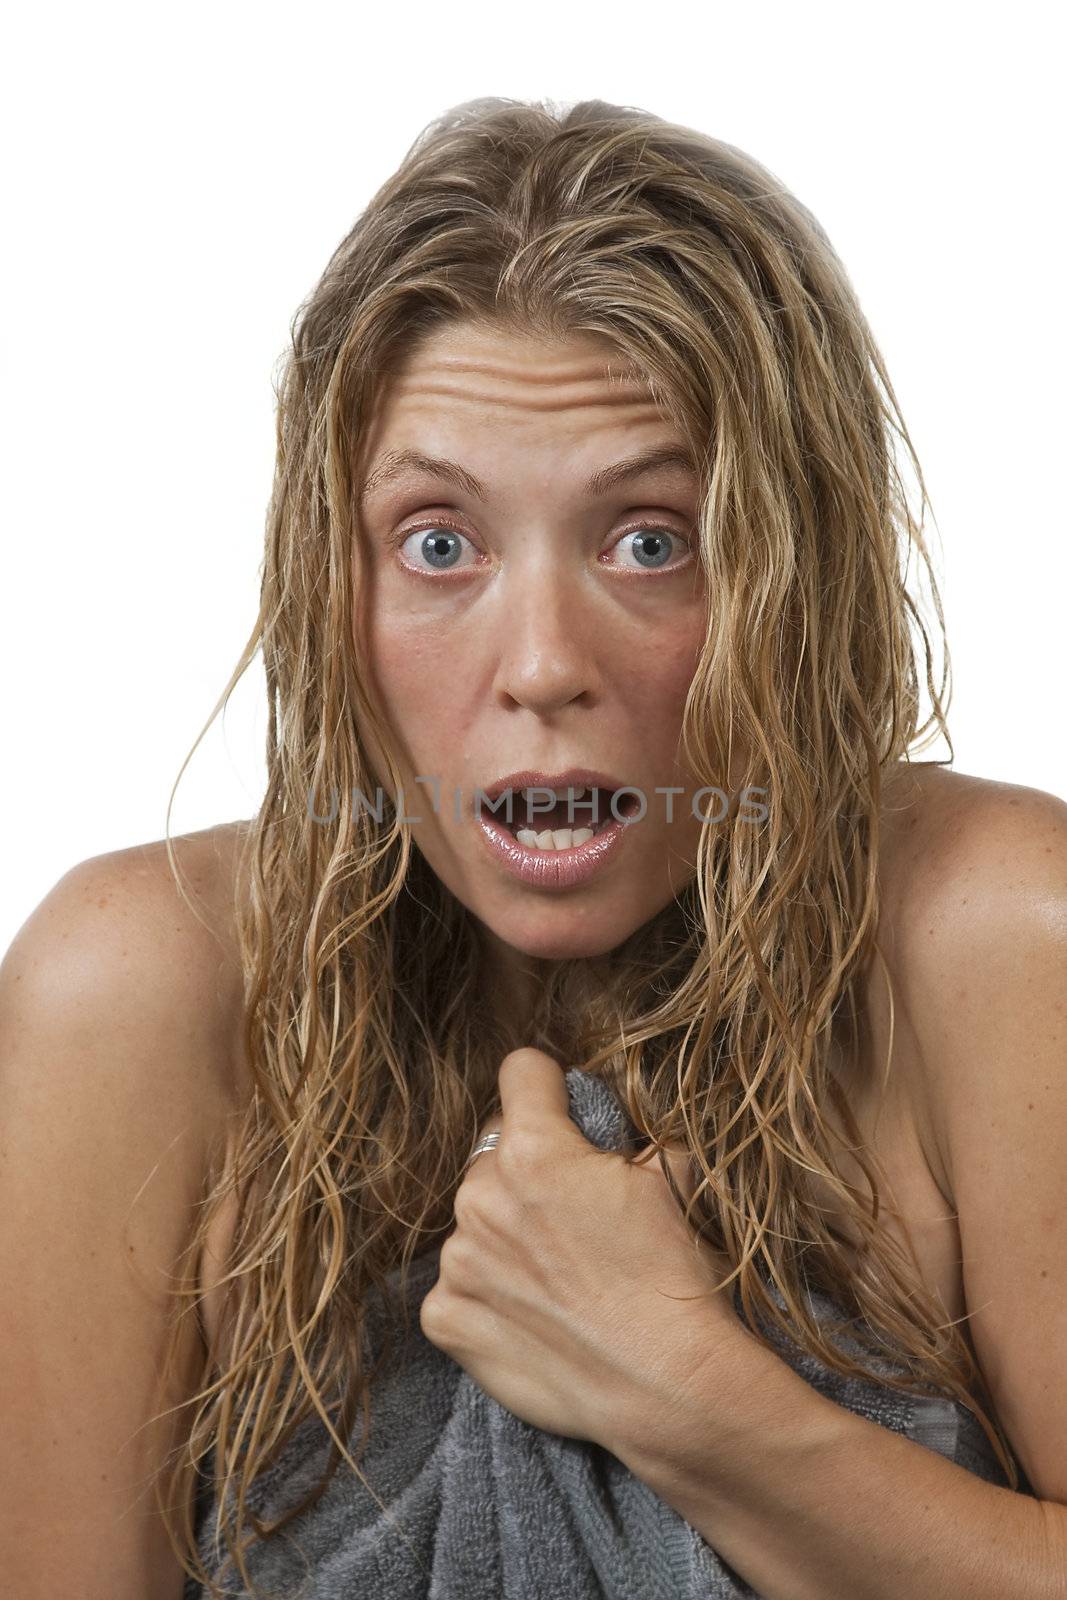 Blond woman with curly hair is surprised and scared while getting out of the shower, grabs her towel. Maybe it's an intruder, or her voyeurist neighbour through the window.